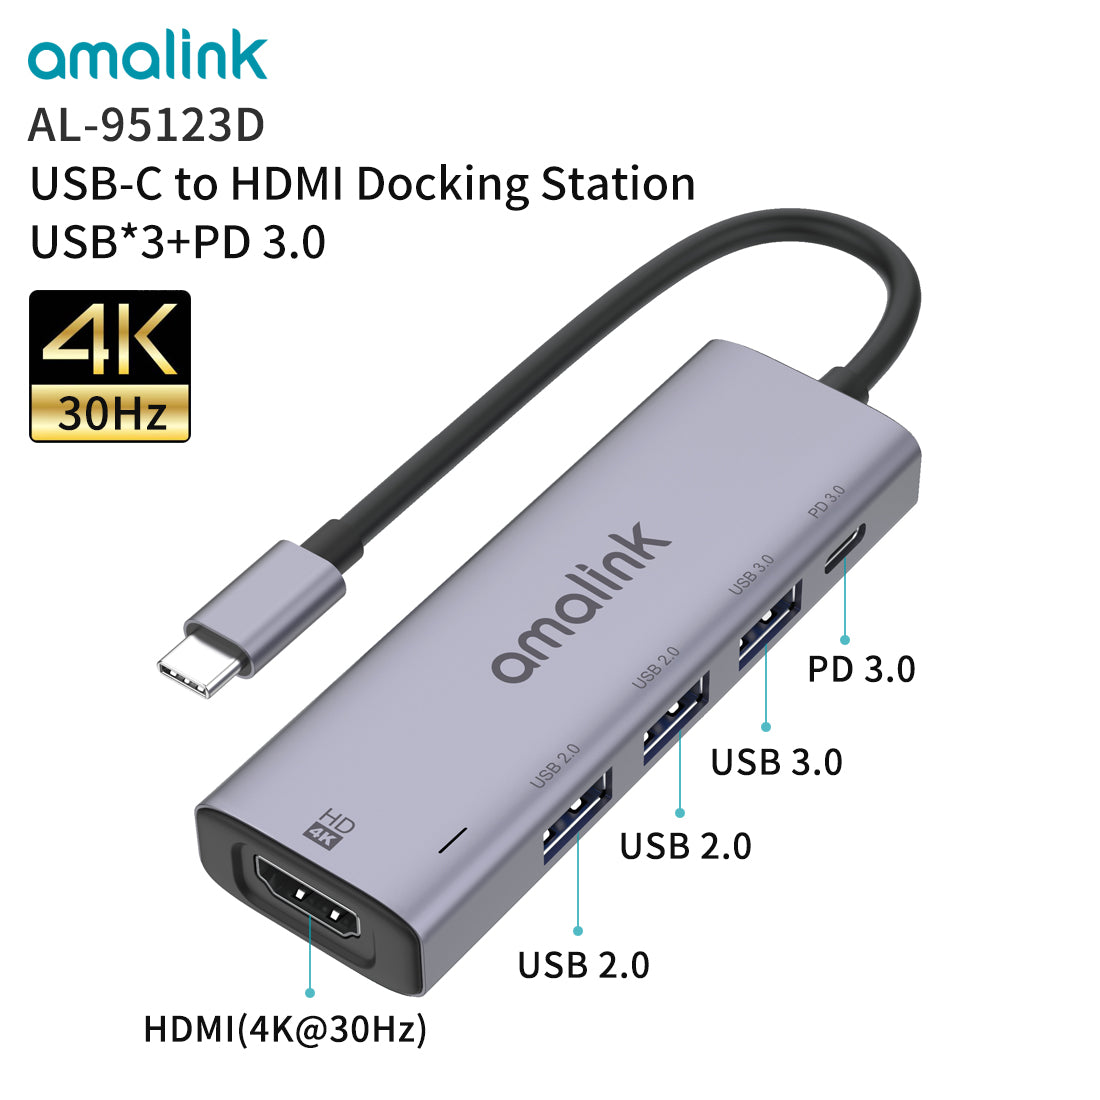 Type C to USB 3.0 Laptop Docking Station HDMI-compatible With USB 2.0 & PD Charging For DELL MacBook (95123D)